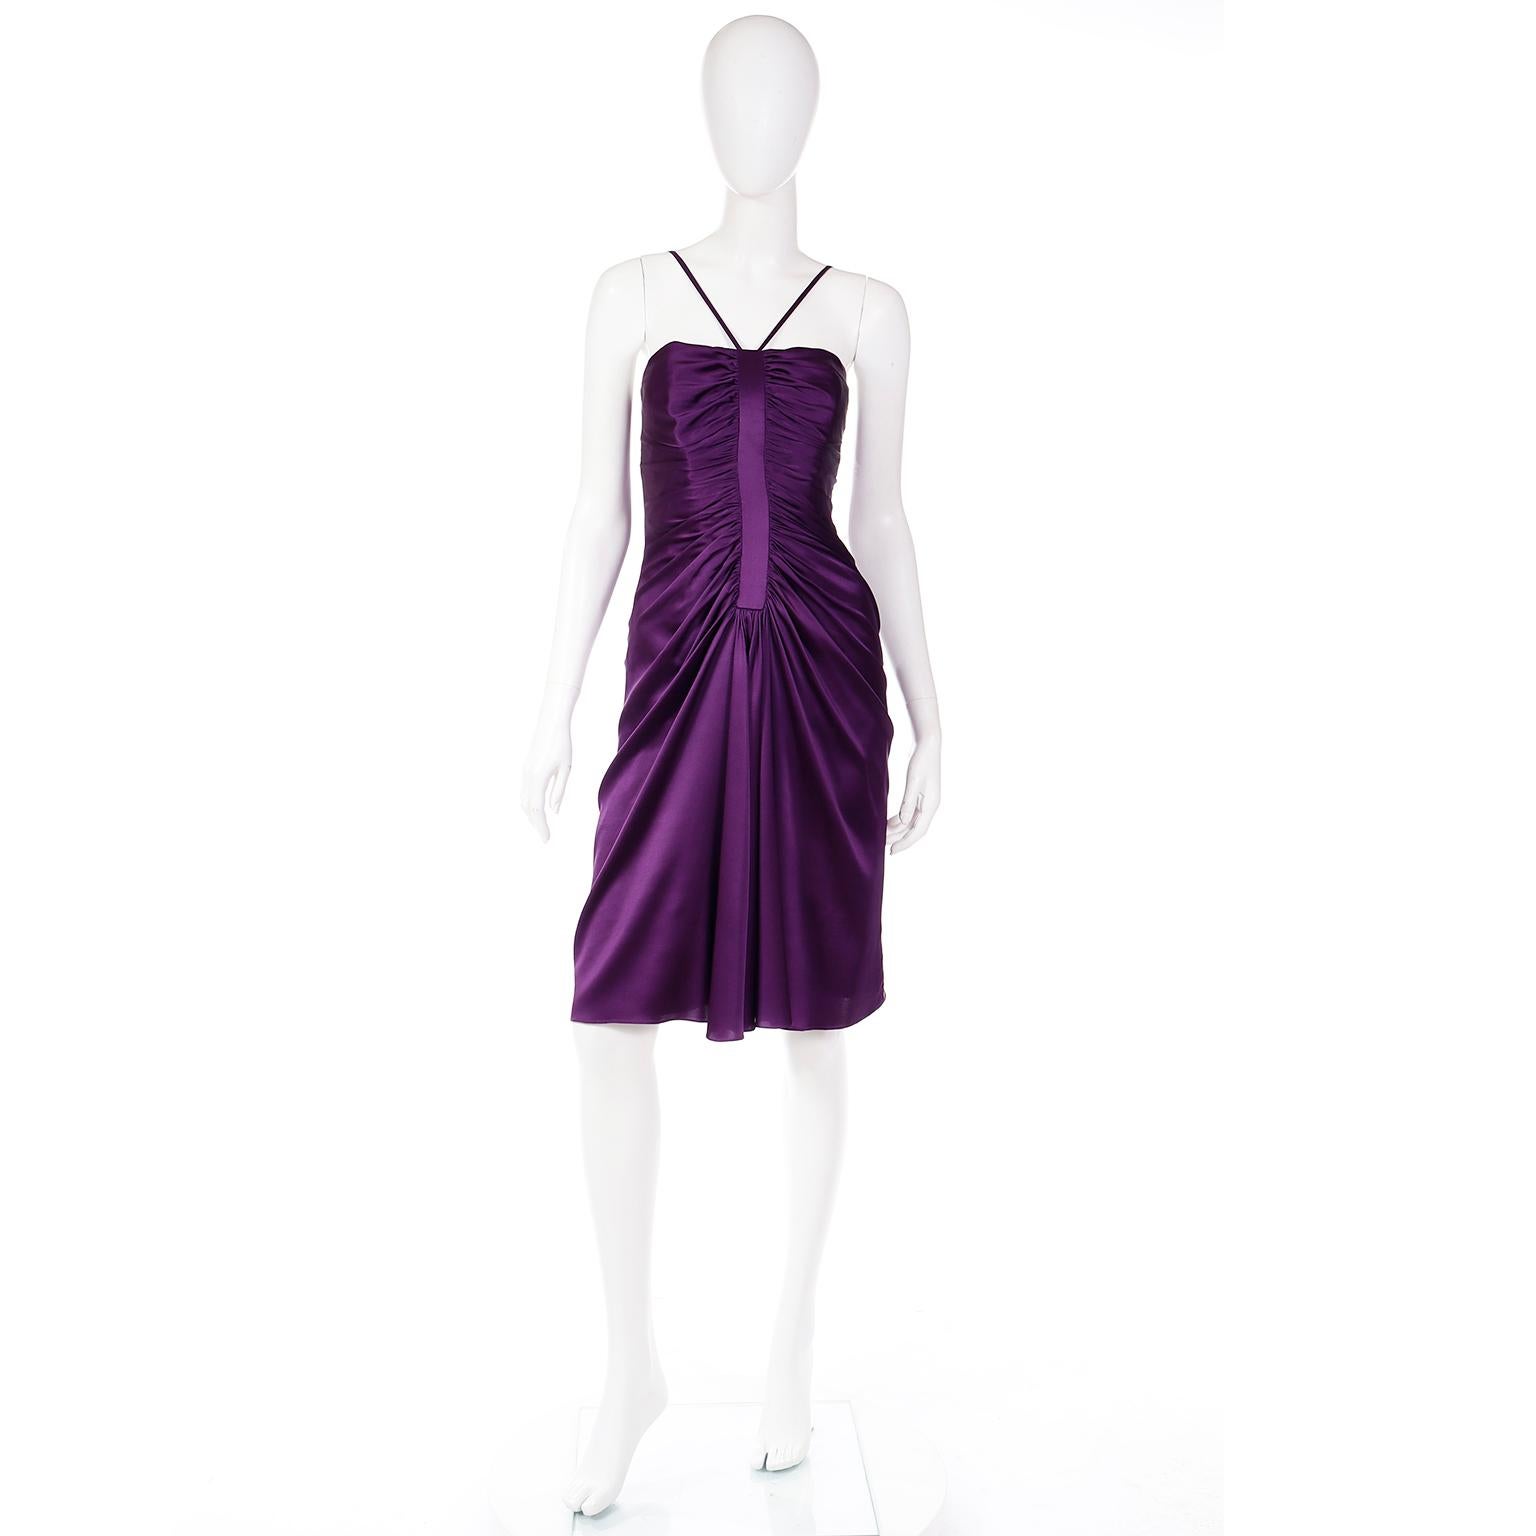 This is a beautiful vintage late 1990's or early 2000's Adolfo Dominguez purple silk charmeuse evening dress with lovely gathering and drape at the front and spaghetti straps. 
This gorgeous, fully lined evening dress has a built in corset with